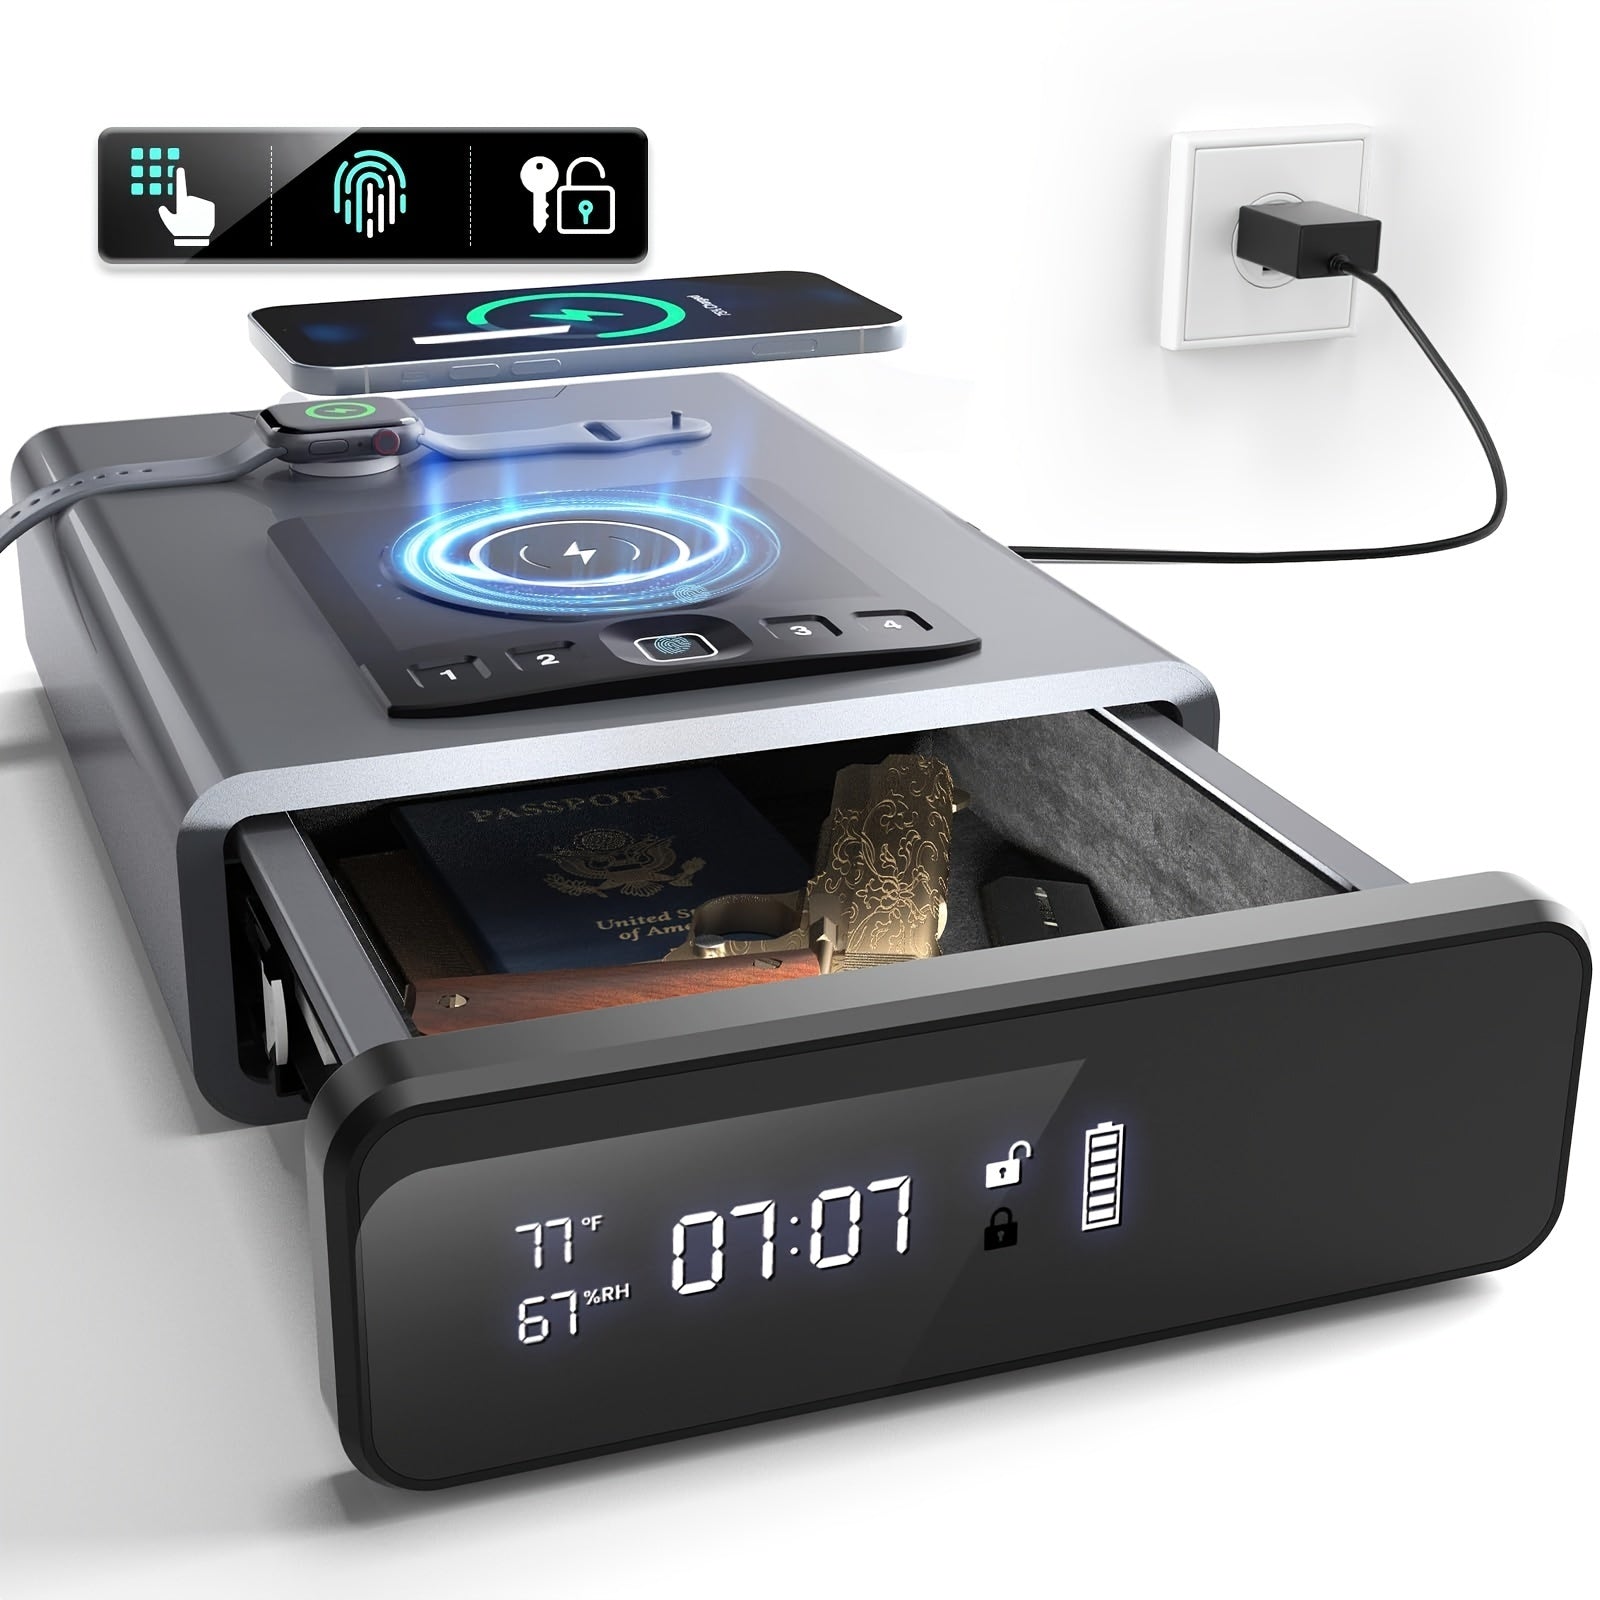 Biometric Gun Safe with LED Clock, DOJ Pistol Safe with 2-in-1 Watch & Phone Wireless Charging